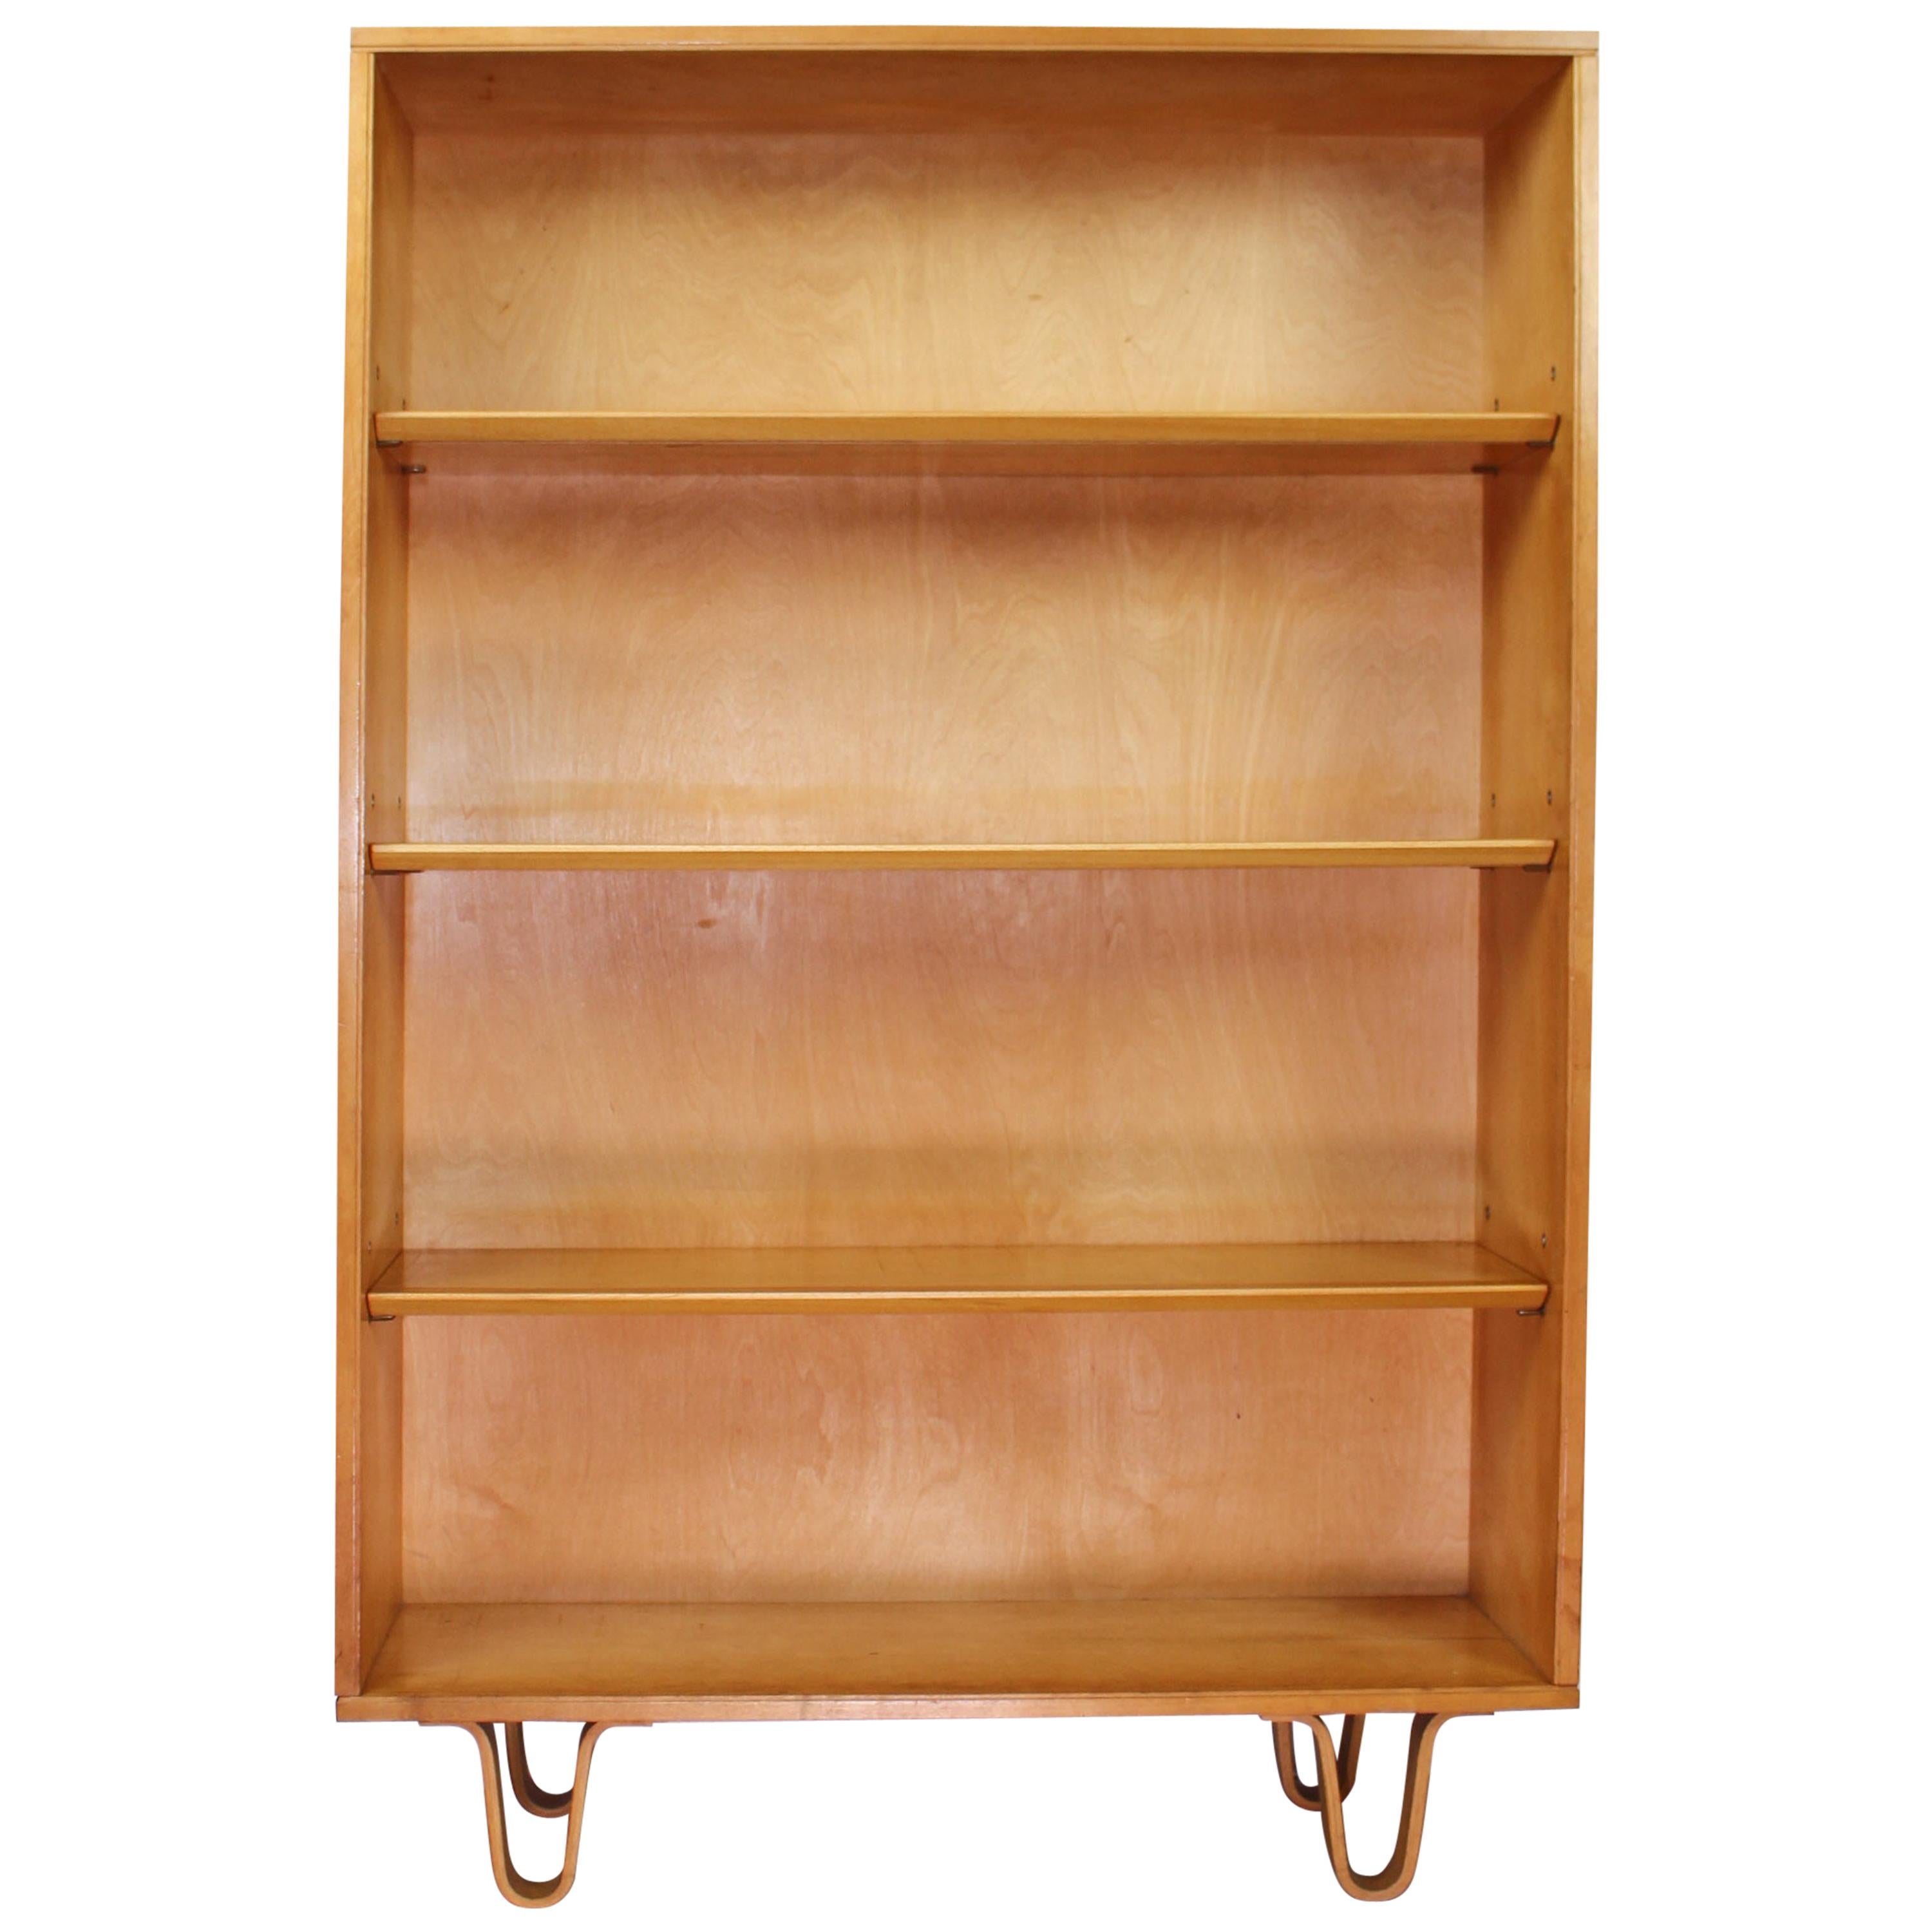 Vintage Midcentury Bookcase BB 02 by Cees Braakman for Pastoe, 1950s